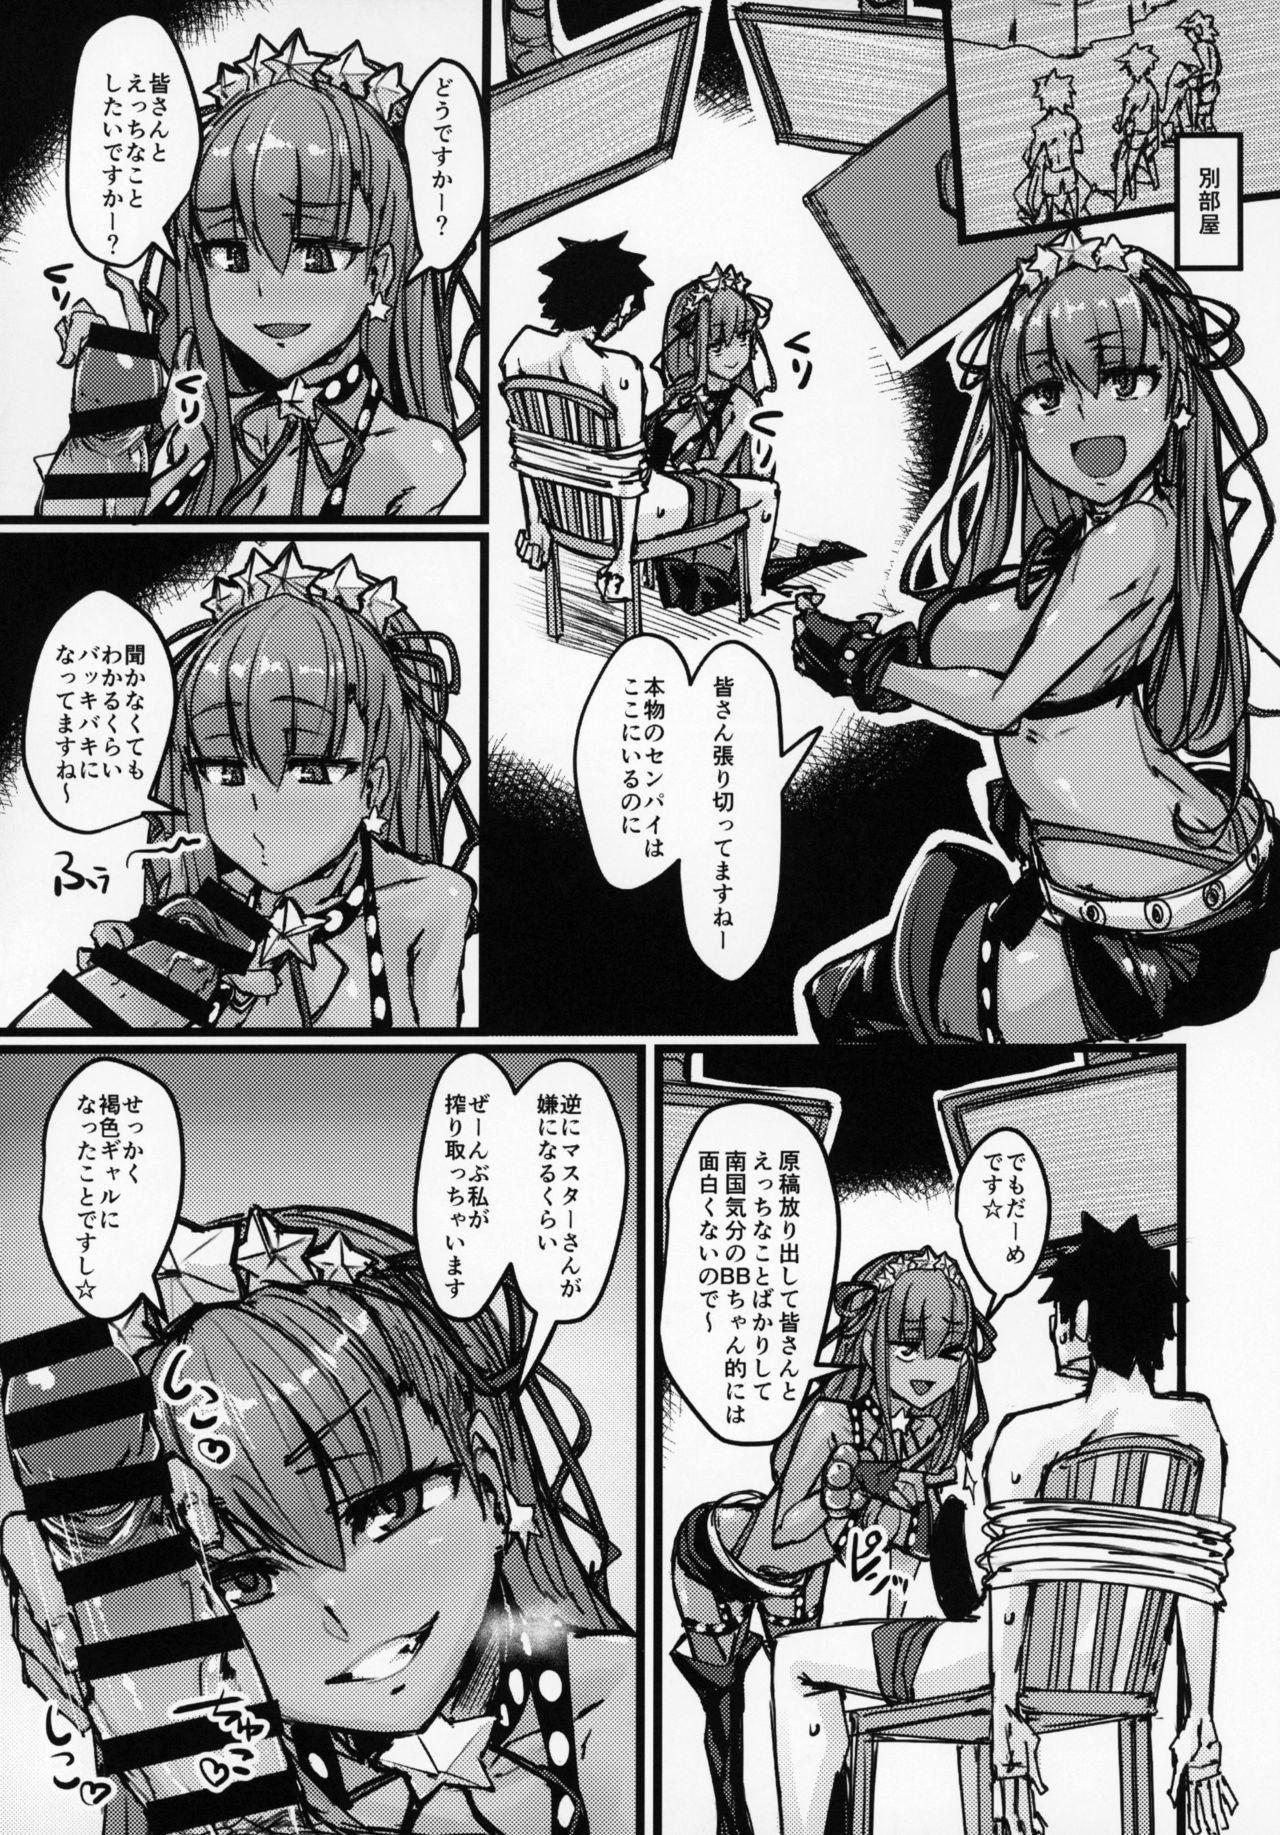 Joven AssAssIN+M - Fate grand order Blackcock - Page 10